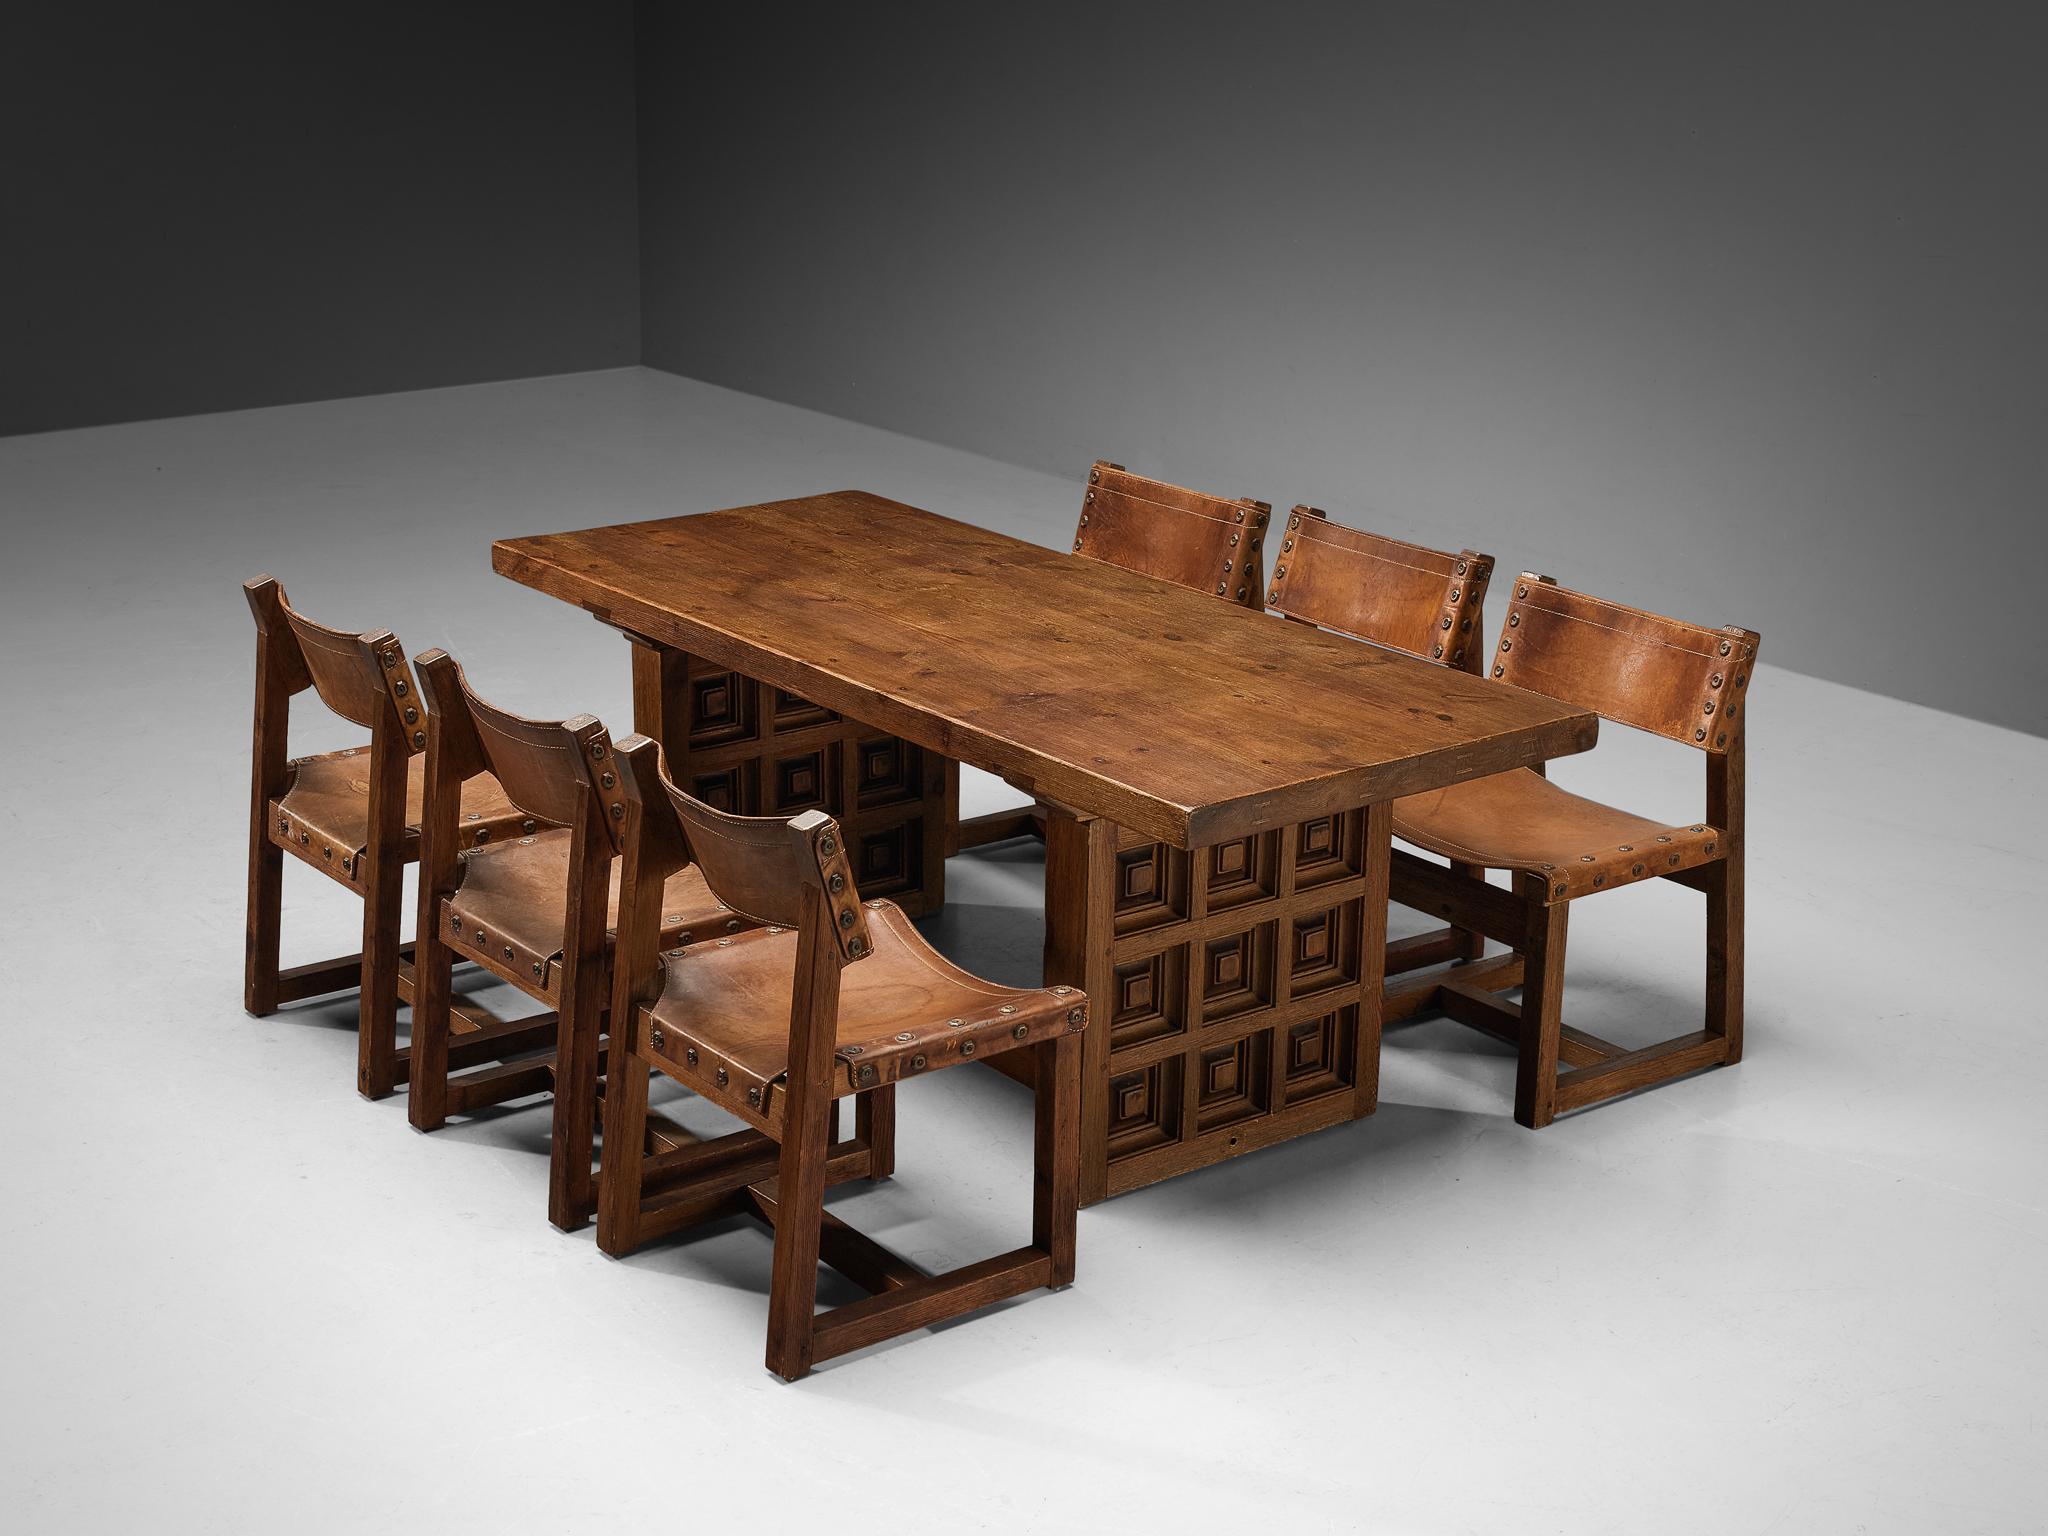 Biosca, dining chairs, dining table, stained pine, leather, Spain, 1950s.

Lovely brutalist dining set consisting of a dining table in pine and six chairs in a patinated lived in leather and pine frames.

Both the dining table and the chairs have a